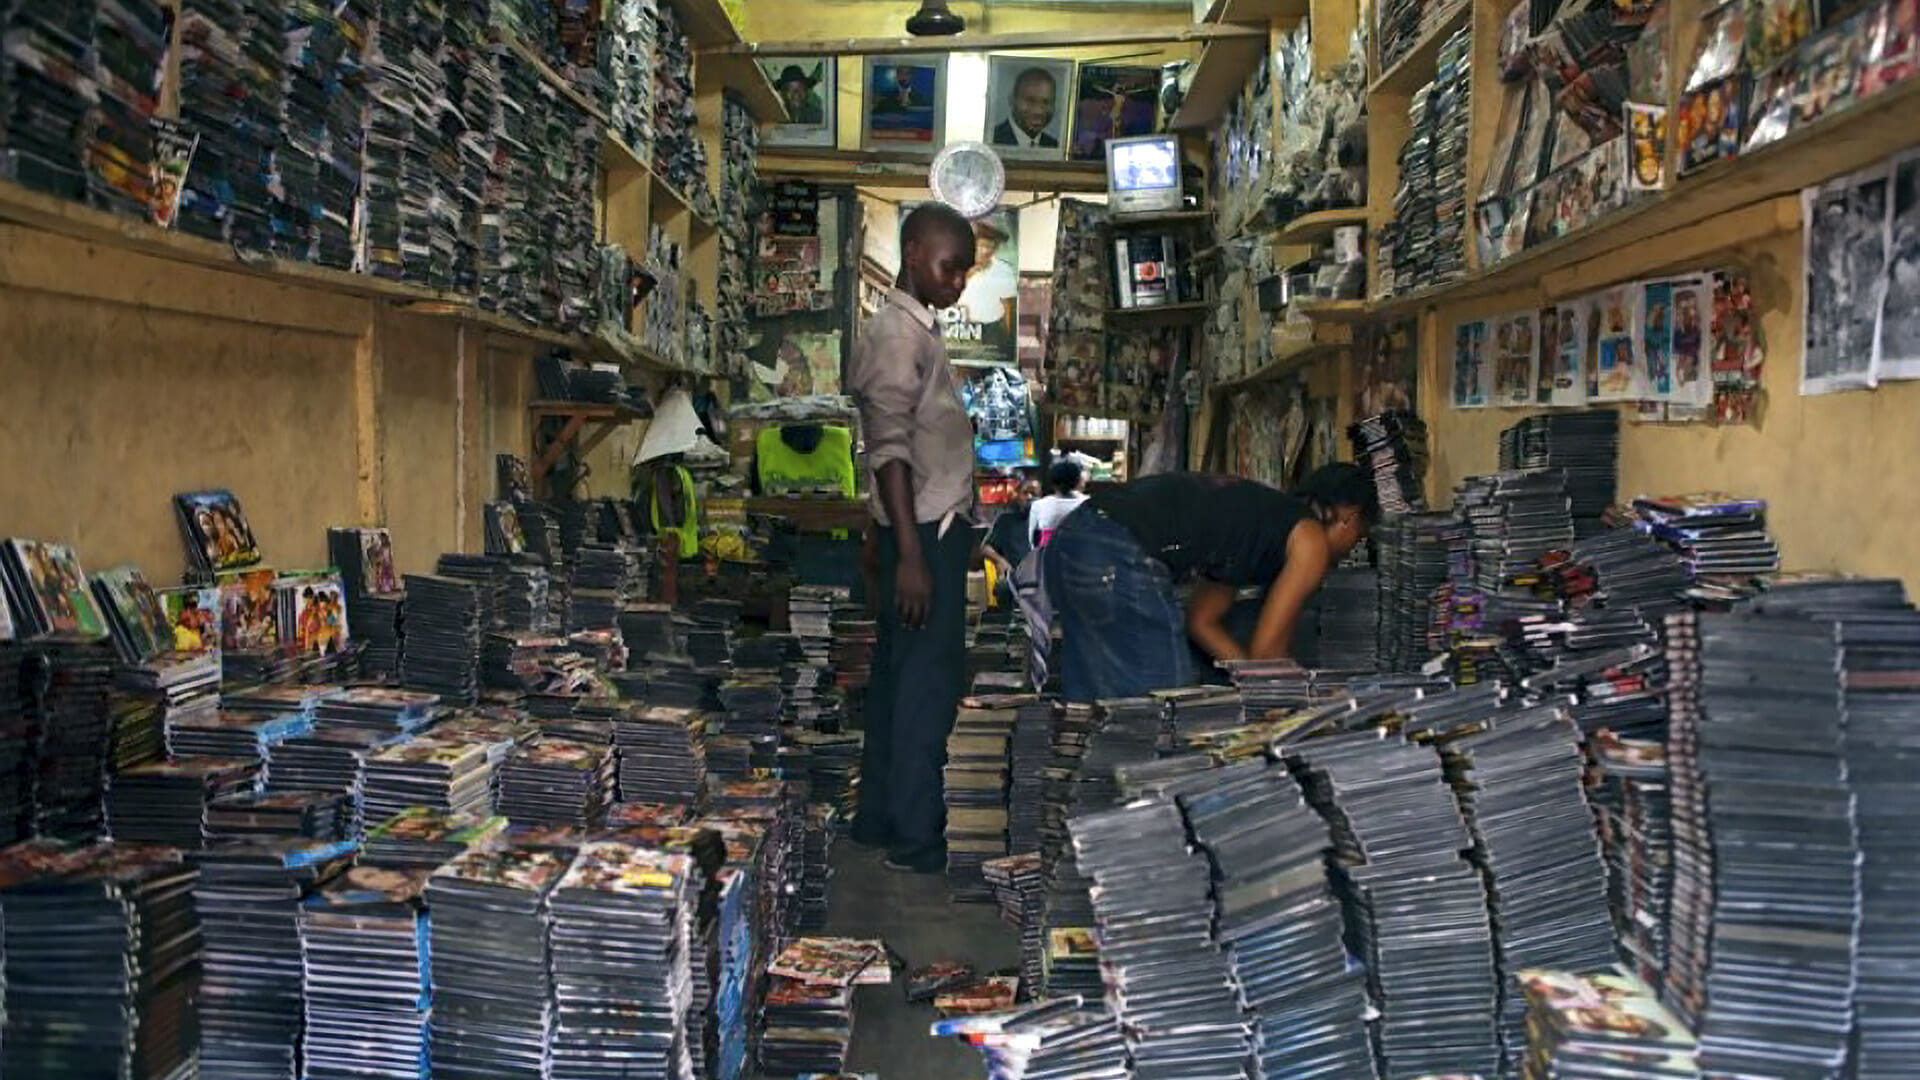 Piracy in Nollywood